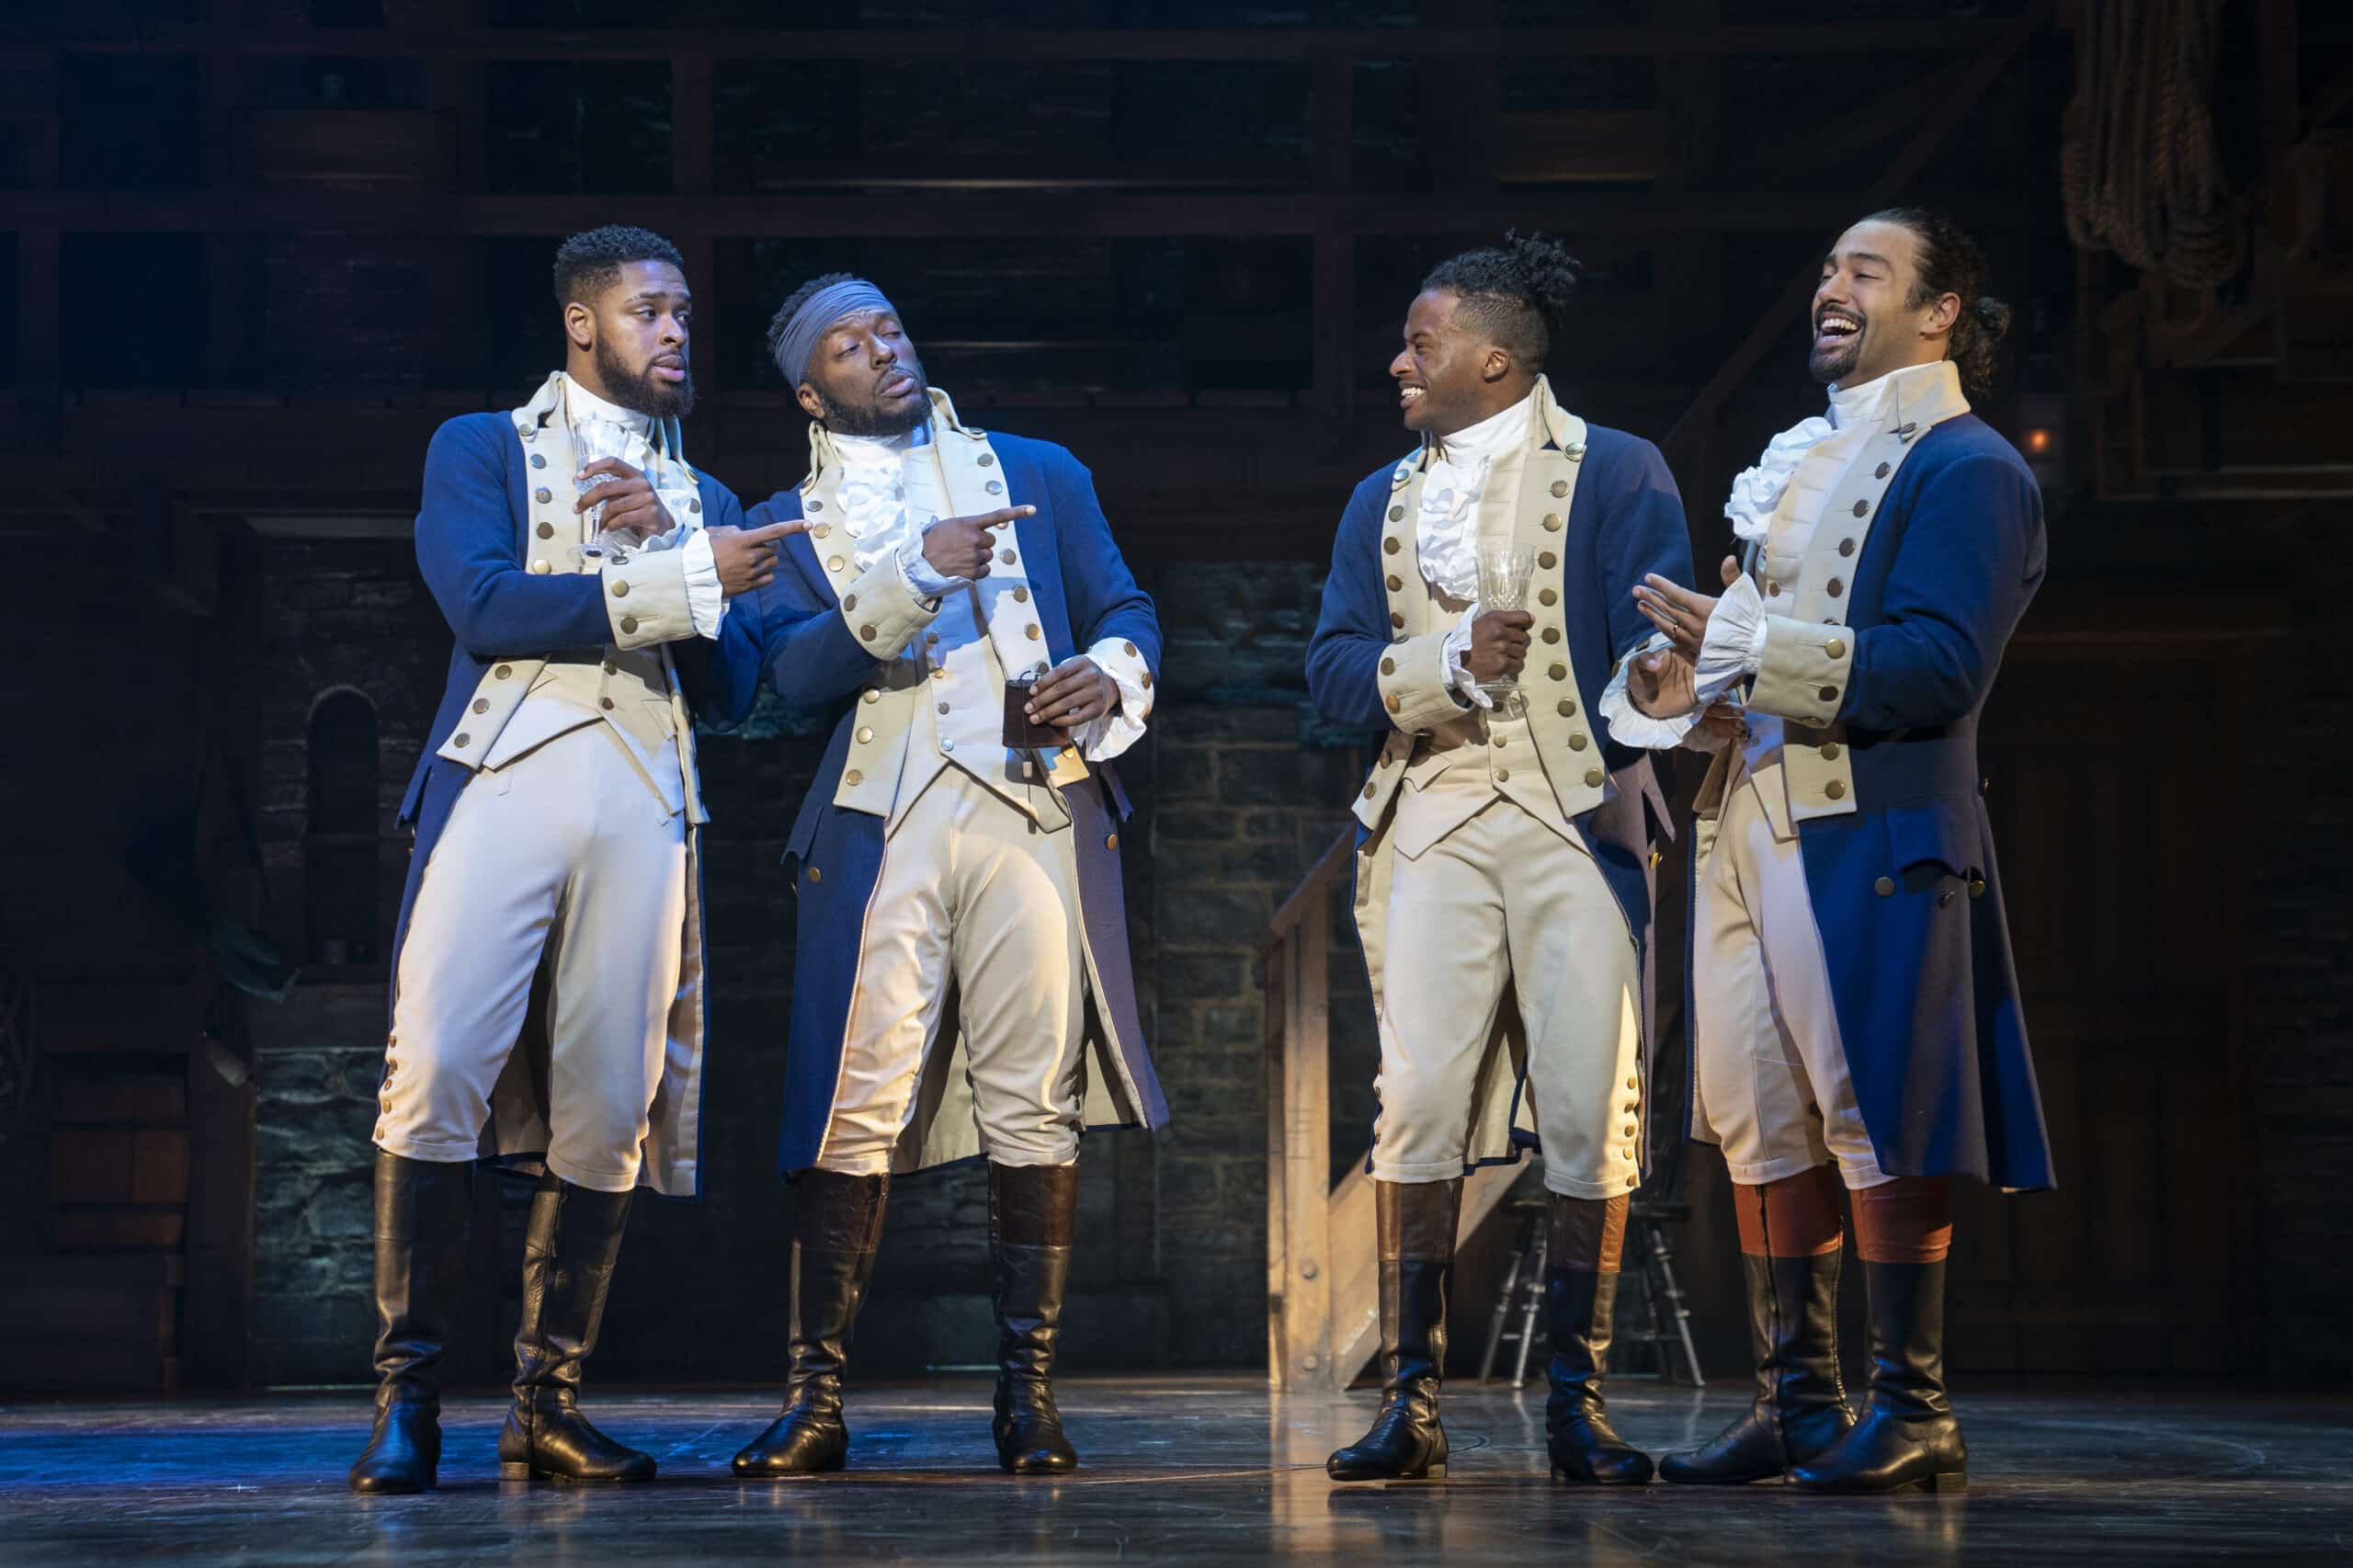 Lafayette, Mulligan, Laurens and Hamilton laughing together